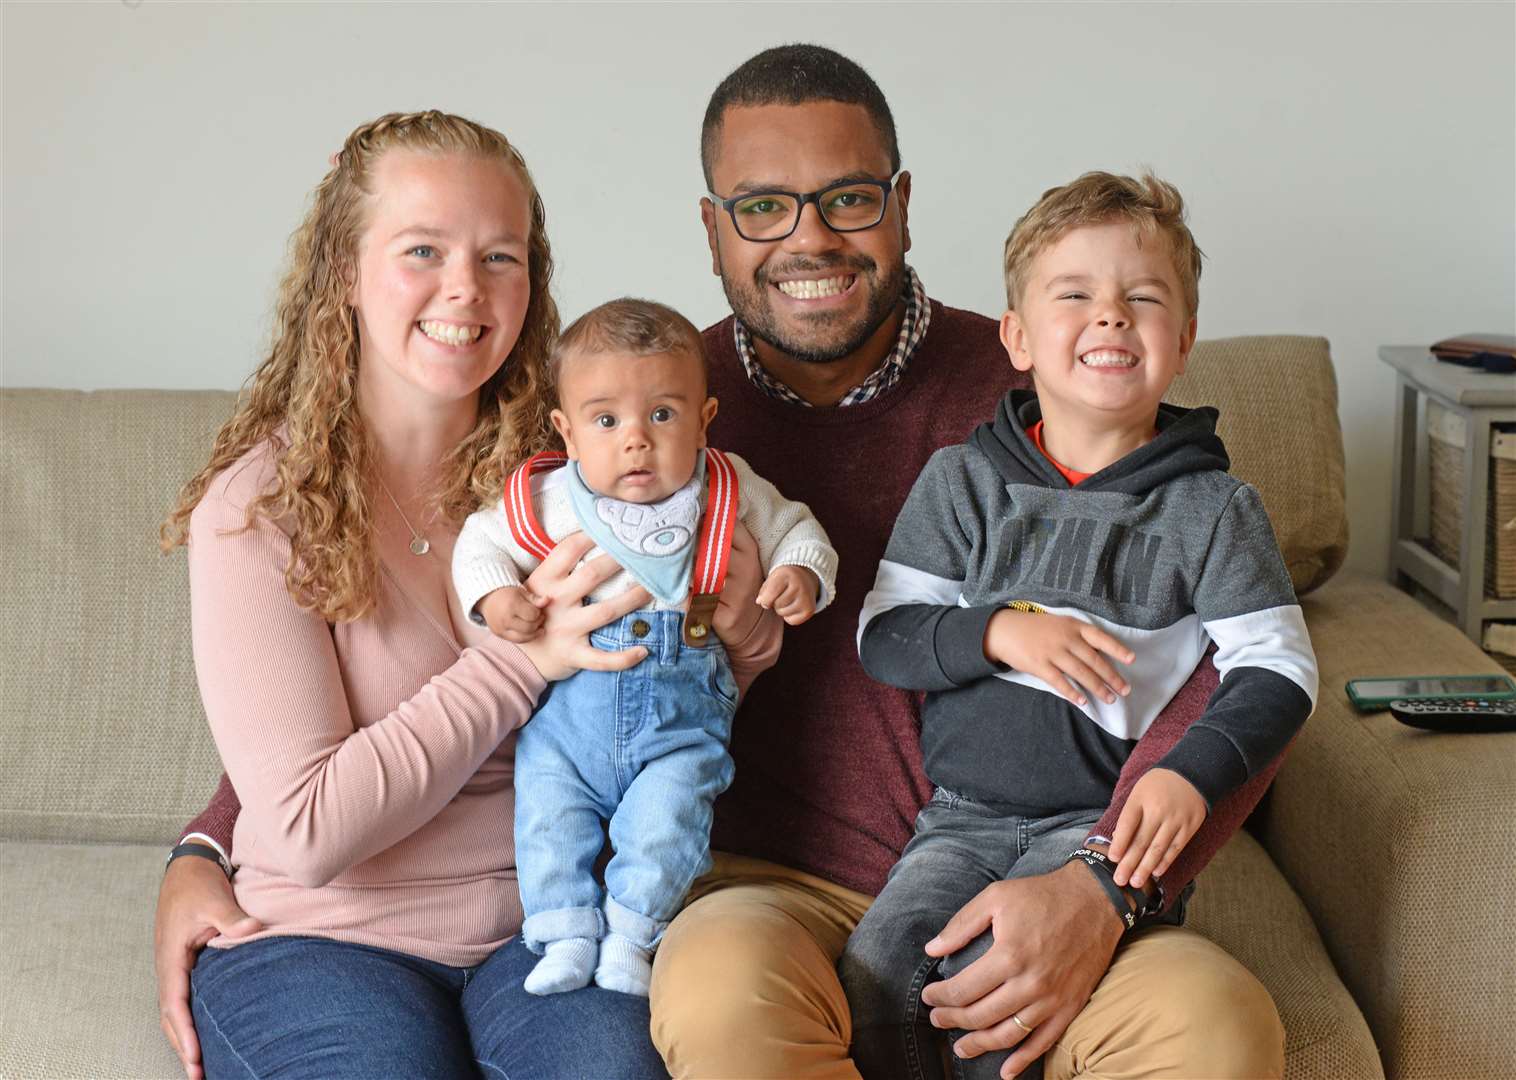 West Essex Maternity Voices Partnership co-chair Chloe Ribeiro with husband Thiago and children Mateo, 3, and four-month-old Malakai. Pic: Vikki Lince (47247927)